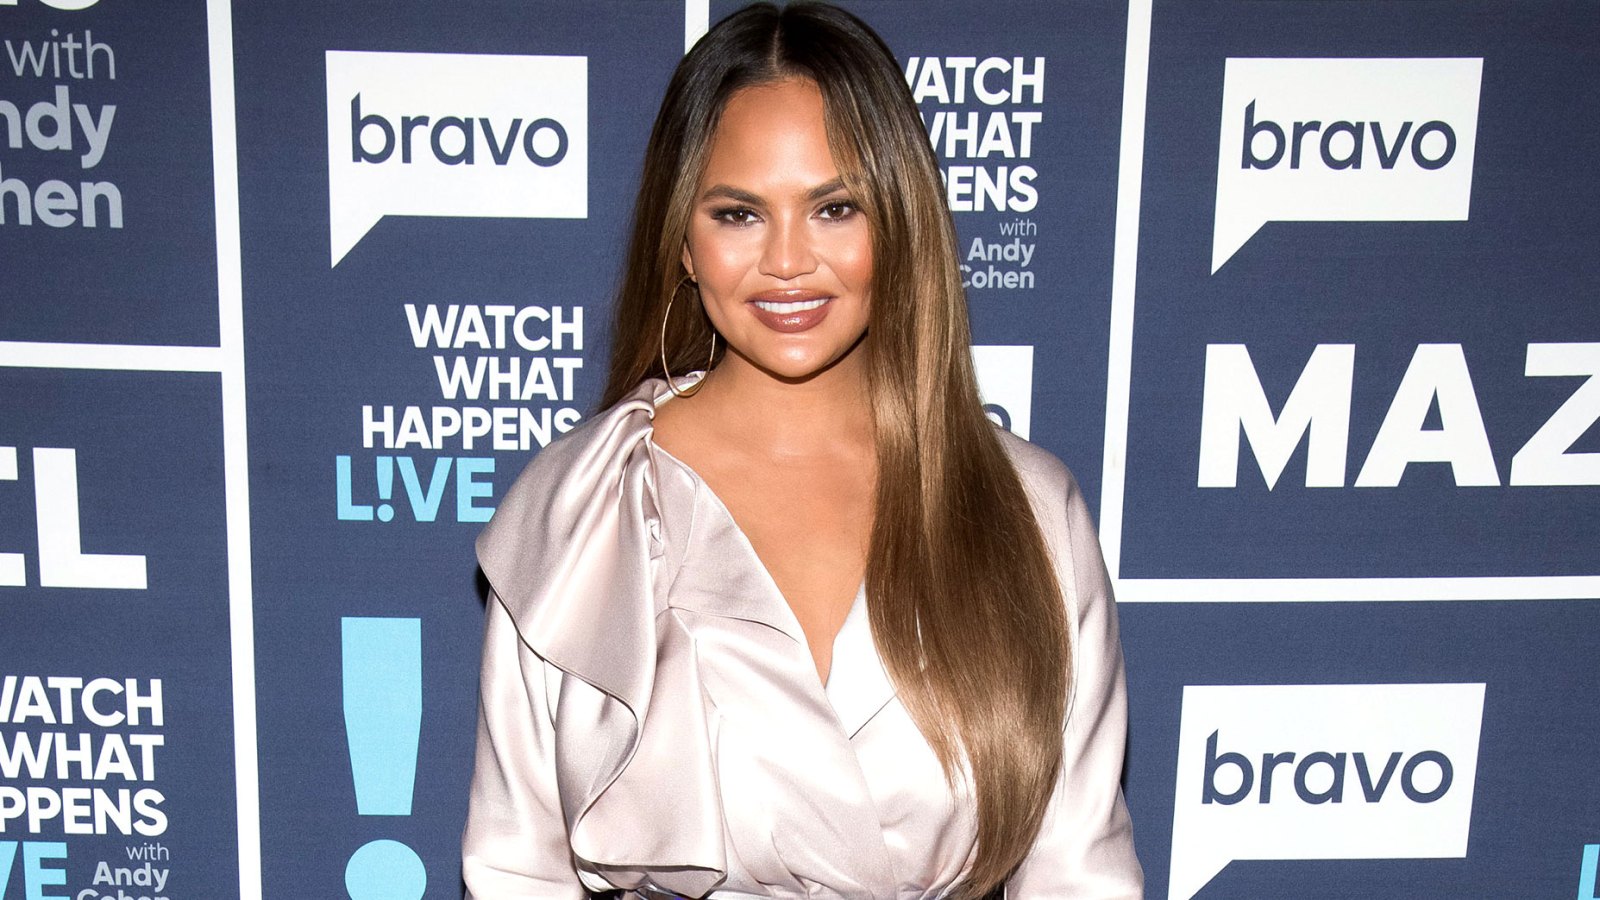 Chrissy Teigen Posts Hilarious Workout Video While on Vacation